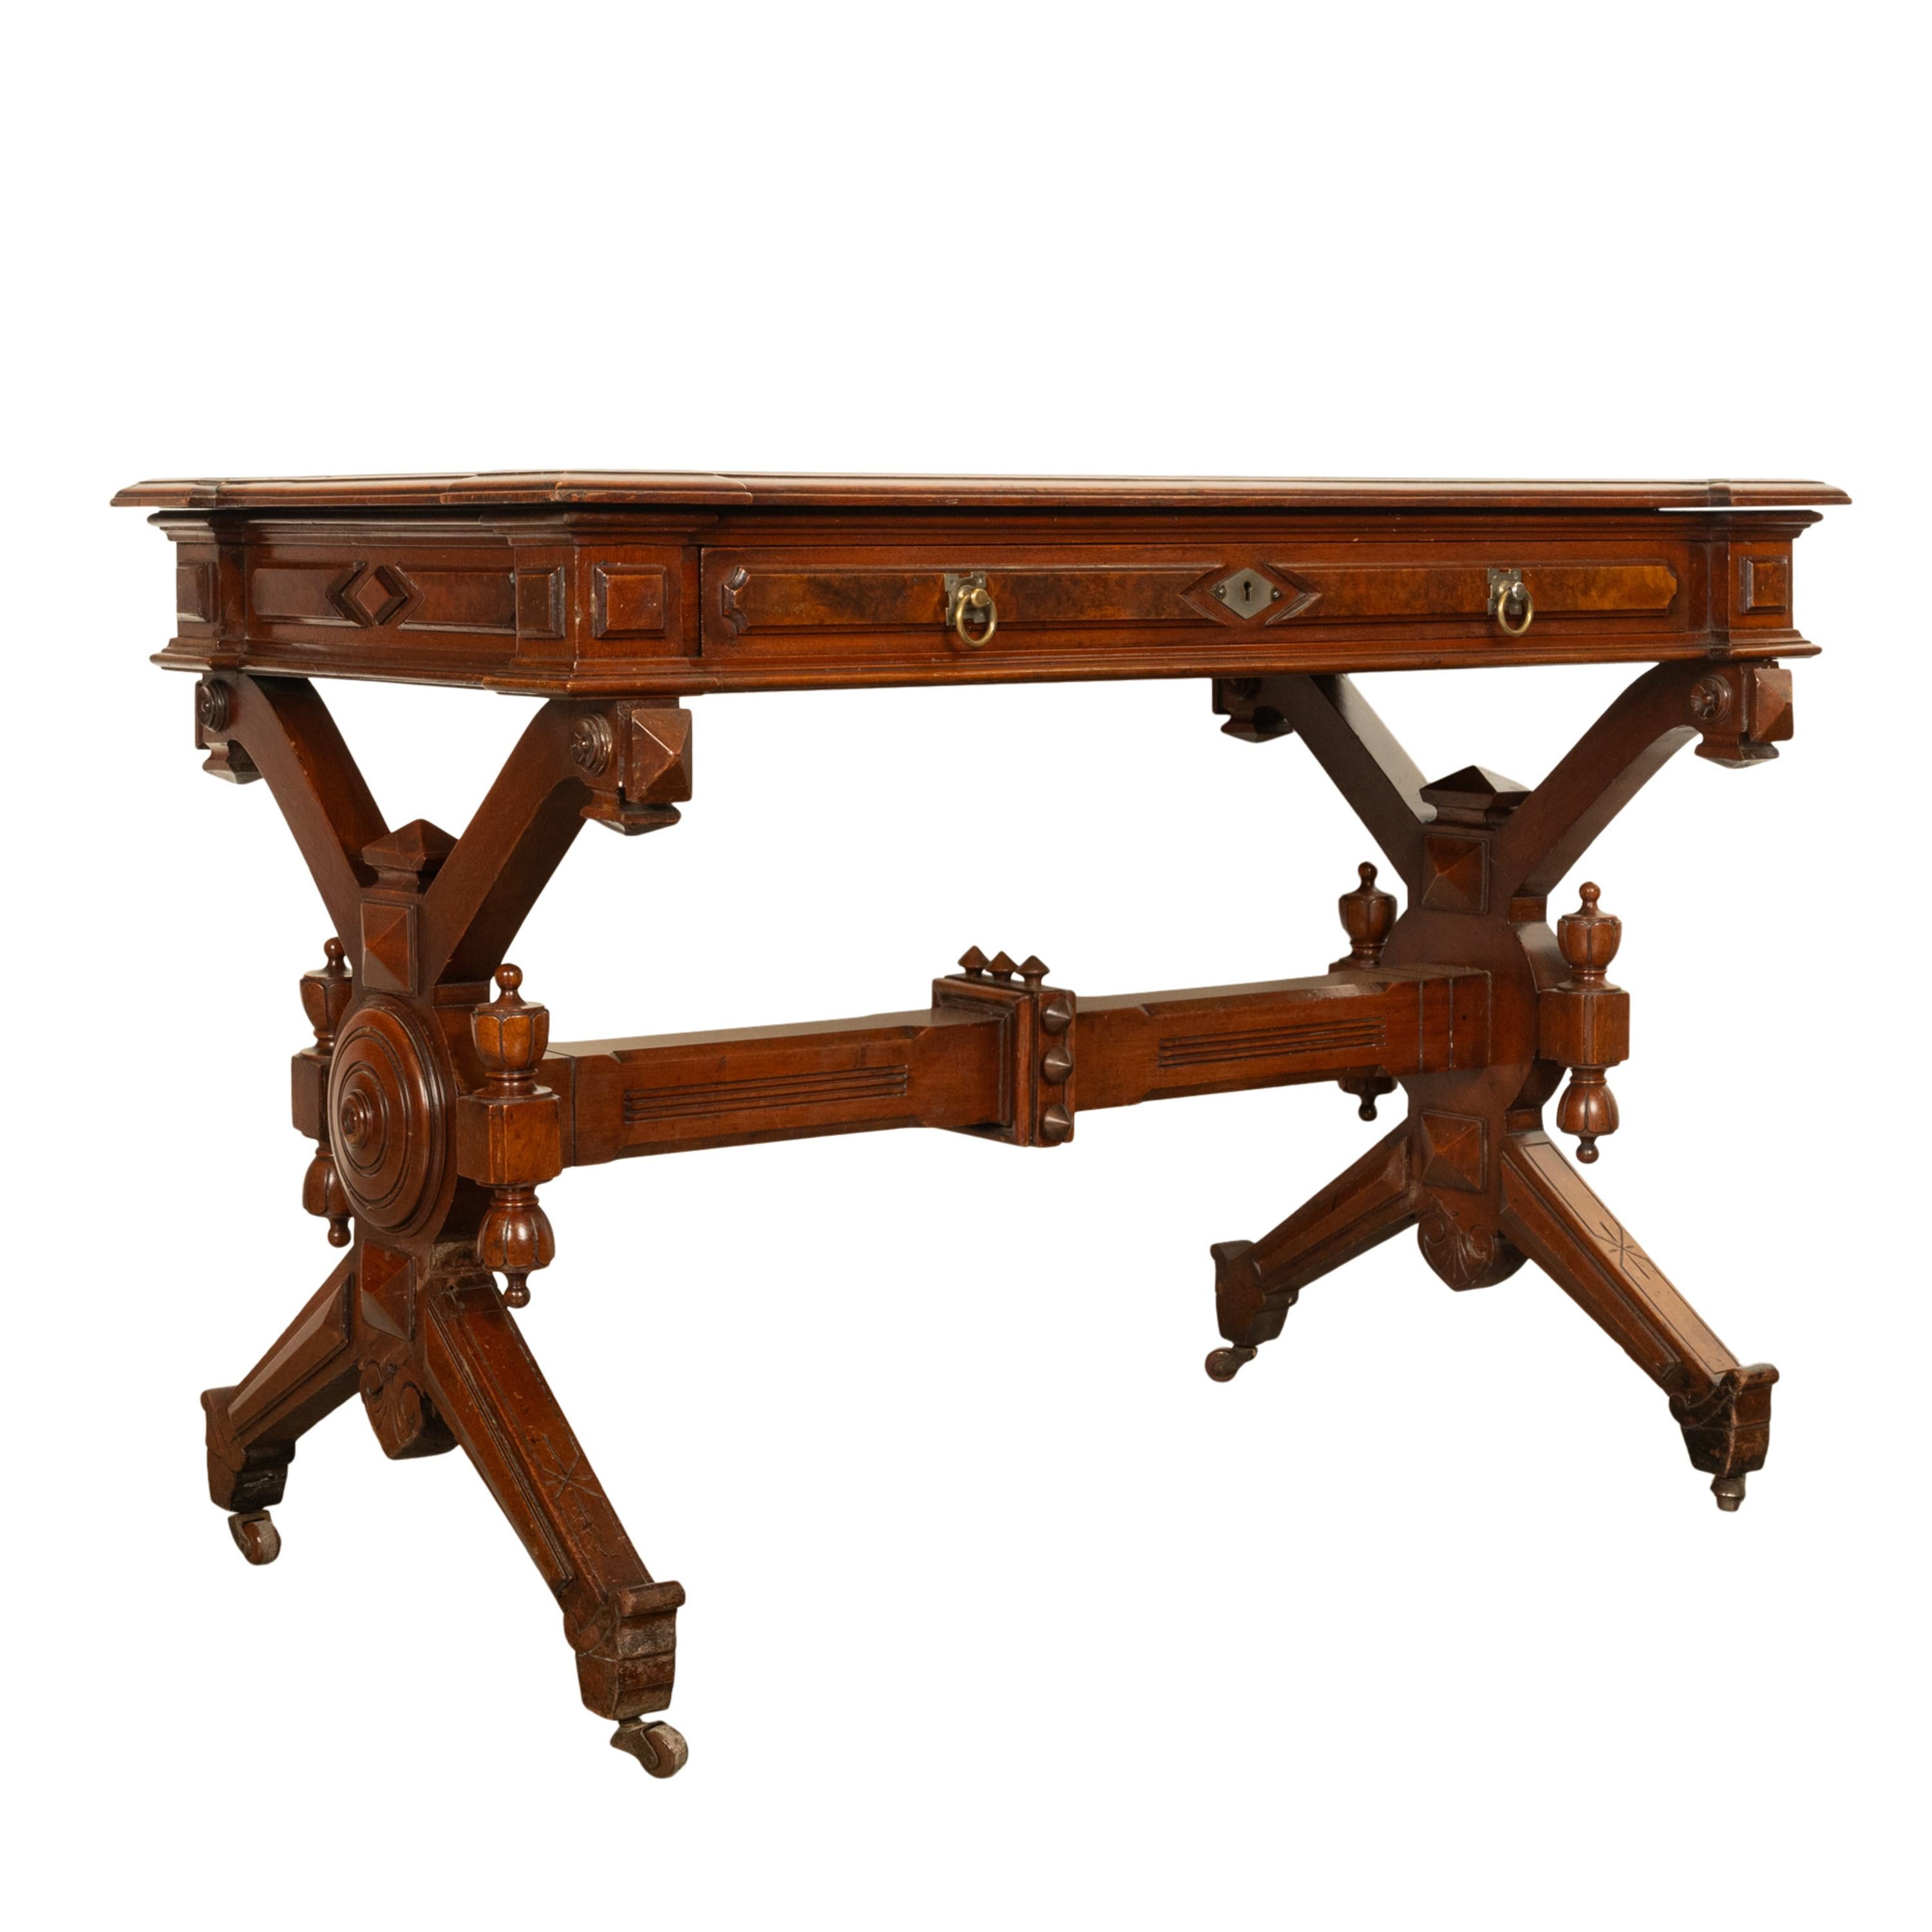 A good antique American walnut Renaissance Revival writing table desk, circa 1875.
The table demonstrating the influence of the Aesthetic Movement and designers such as Charles Eastlake. The table top having the original brown tooled inset leather